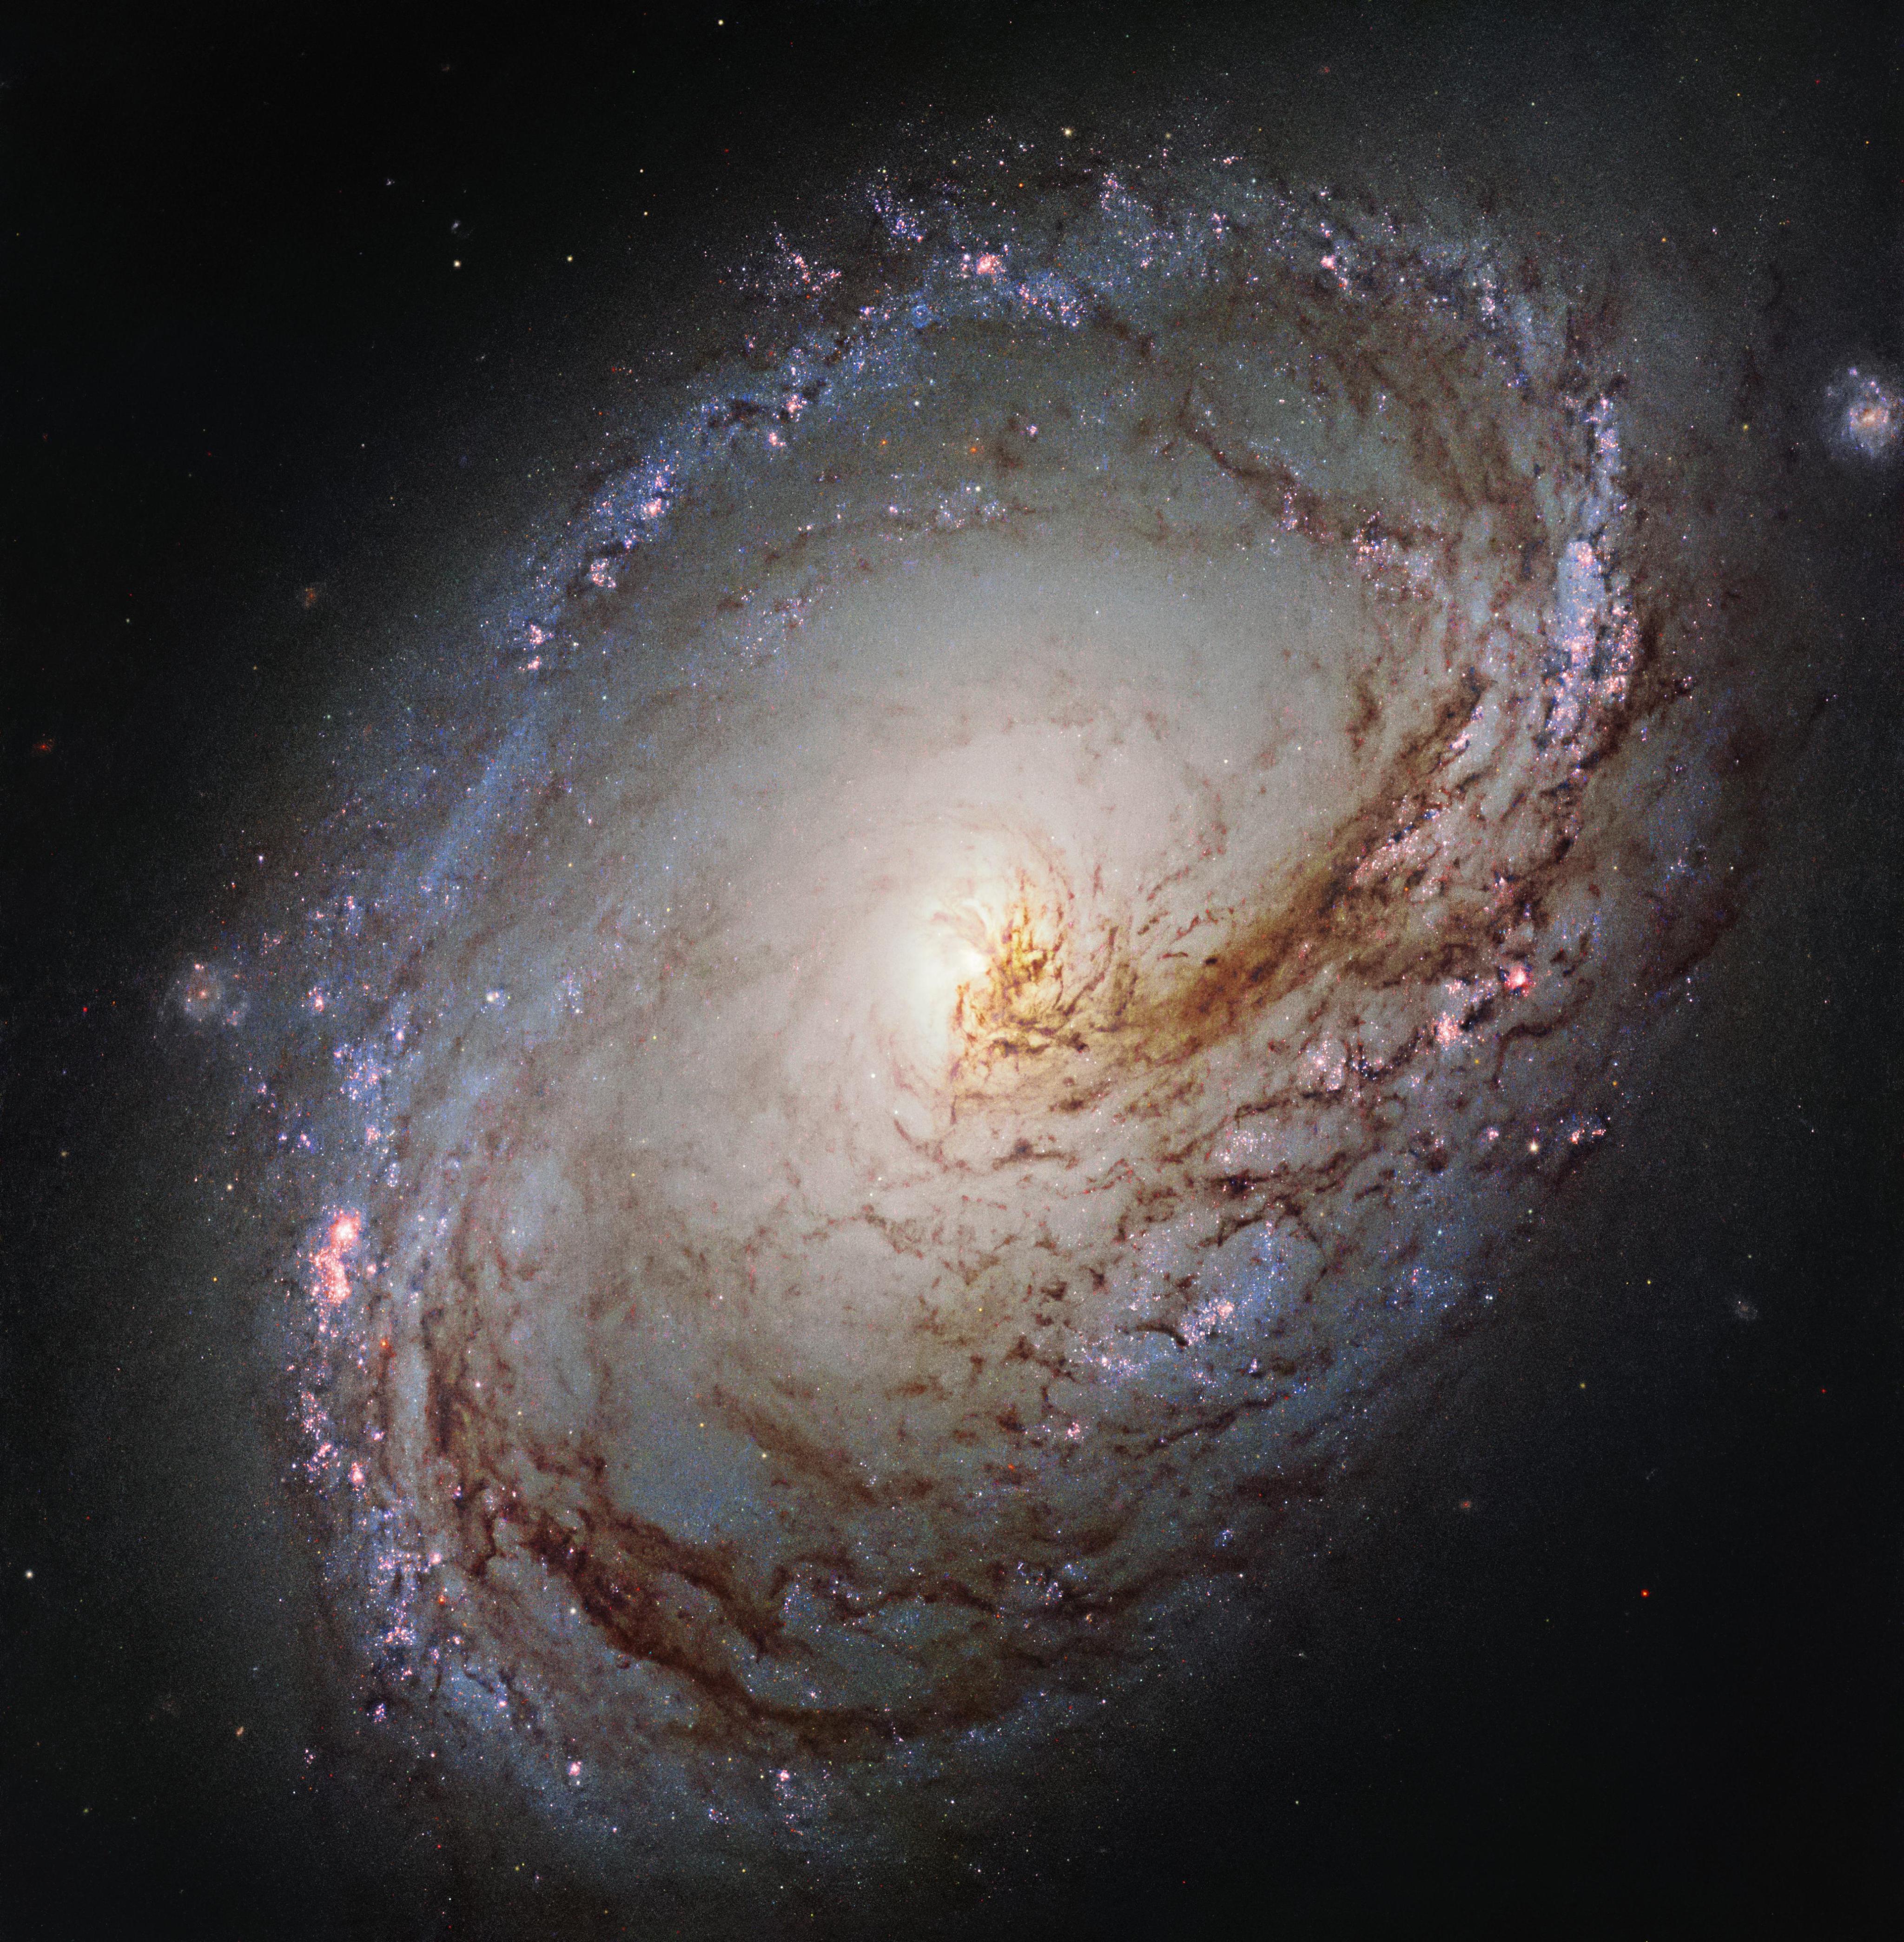 A spiral galaxy with dark dust on the front side and star formation on the back side.